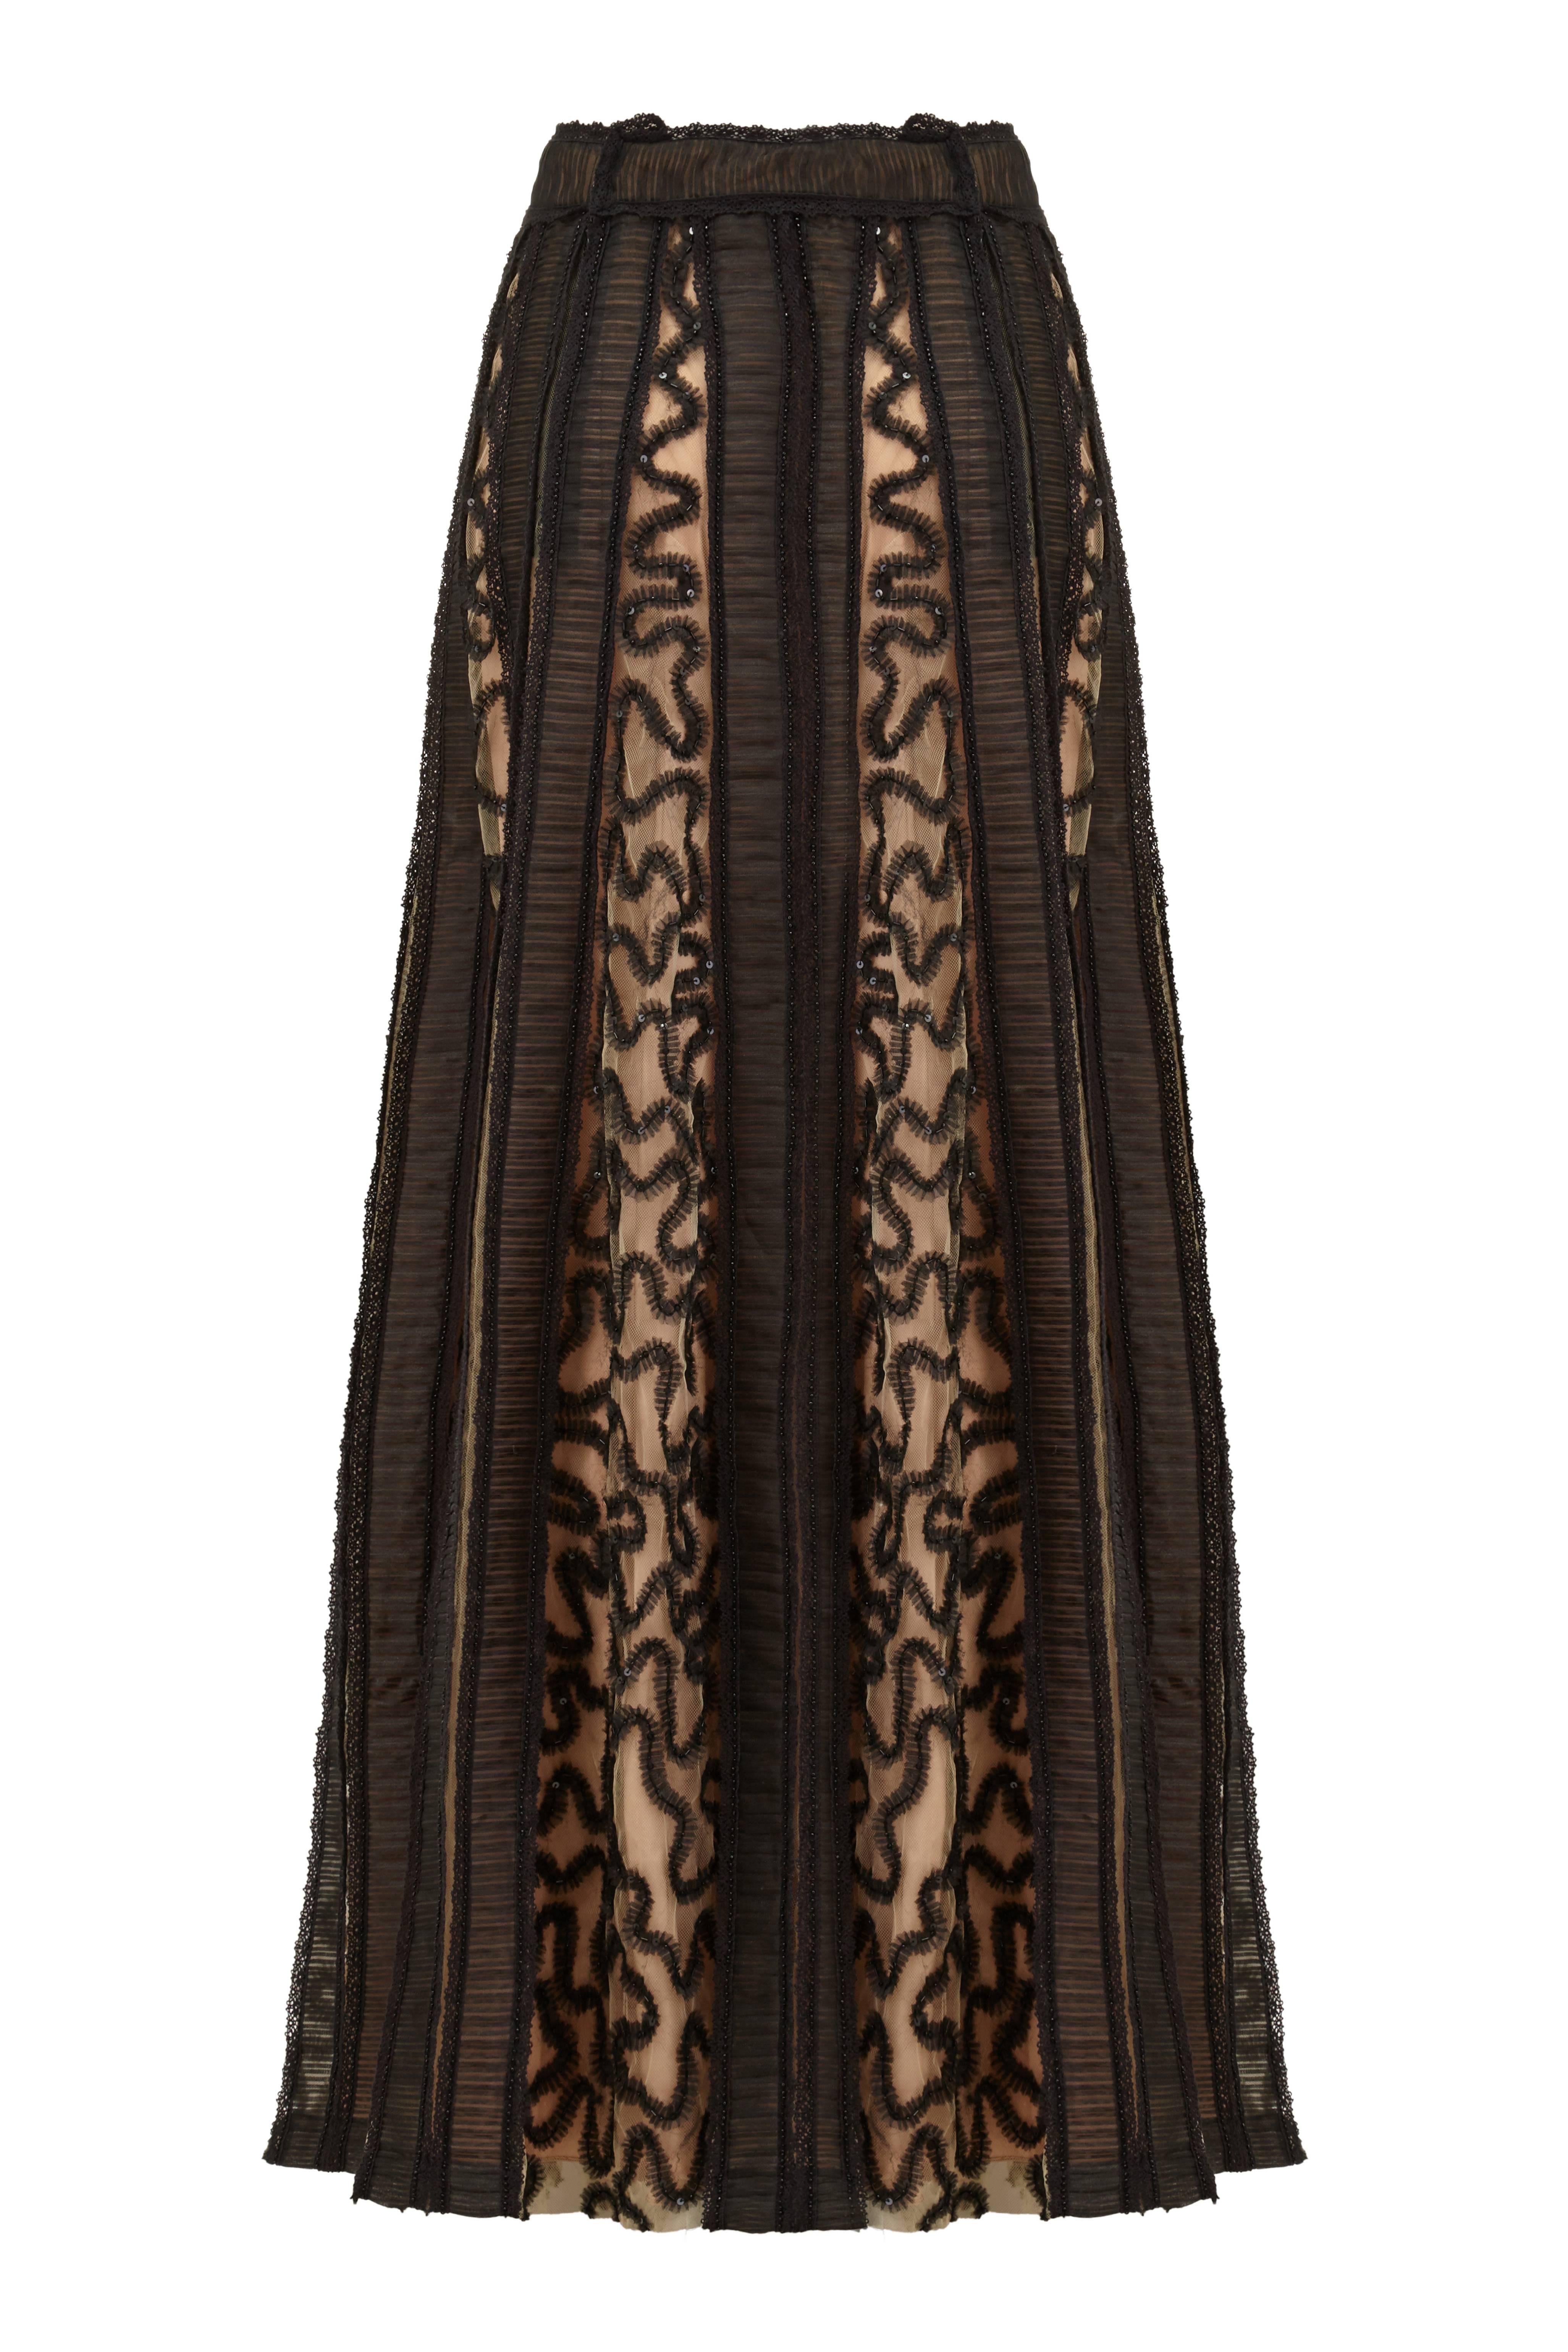 Sensational full-length flared vintage couture skirt by Bill Blass for Saks 5th Avenue.  This piece consists of a net over skirt, which is split in to panels defined by stripes of horizontal finely pleated organza with black beads and sequins and